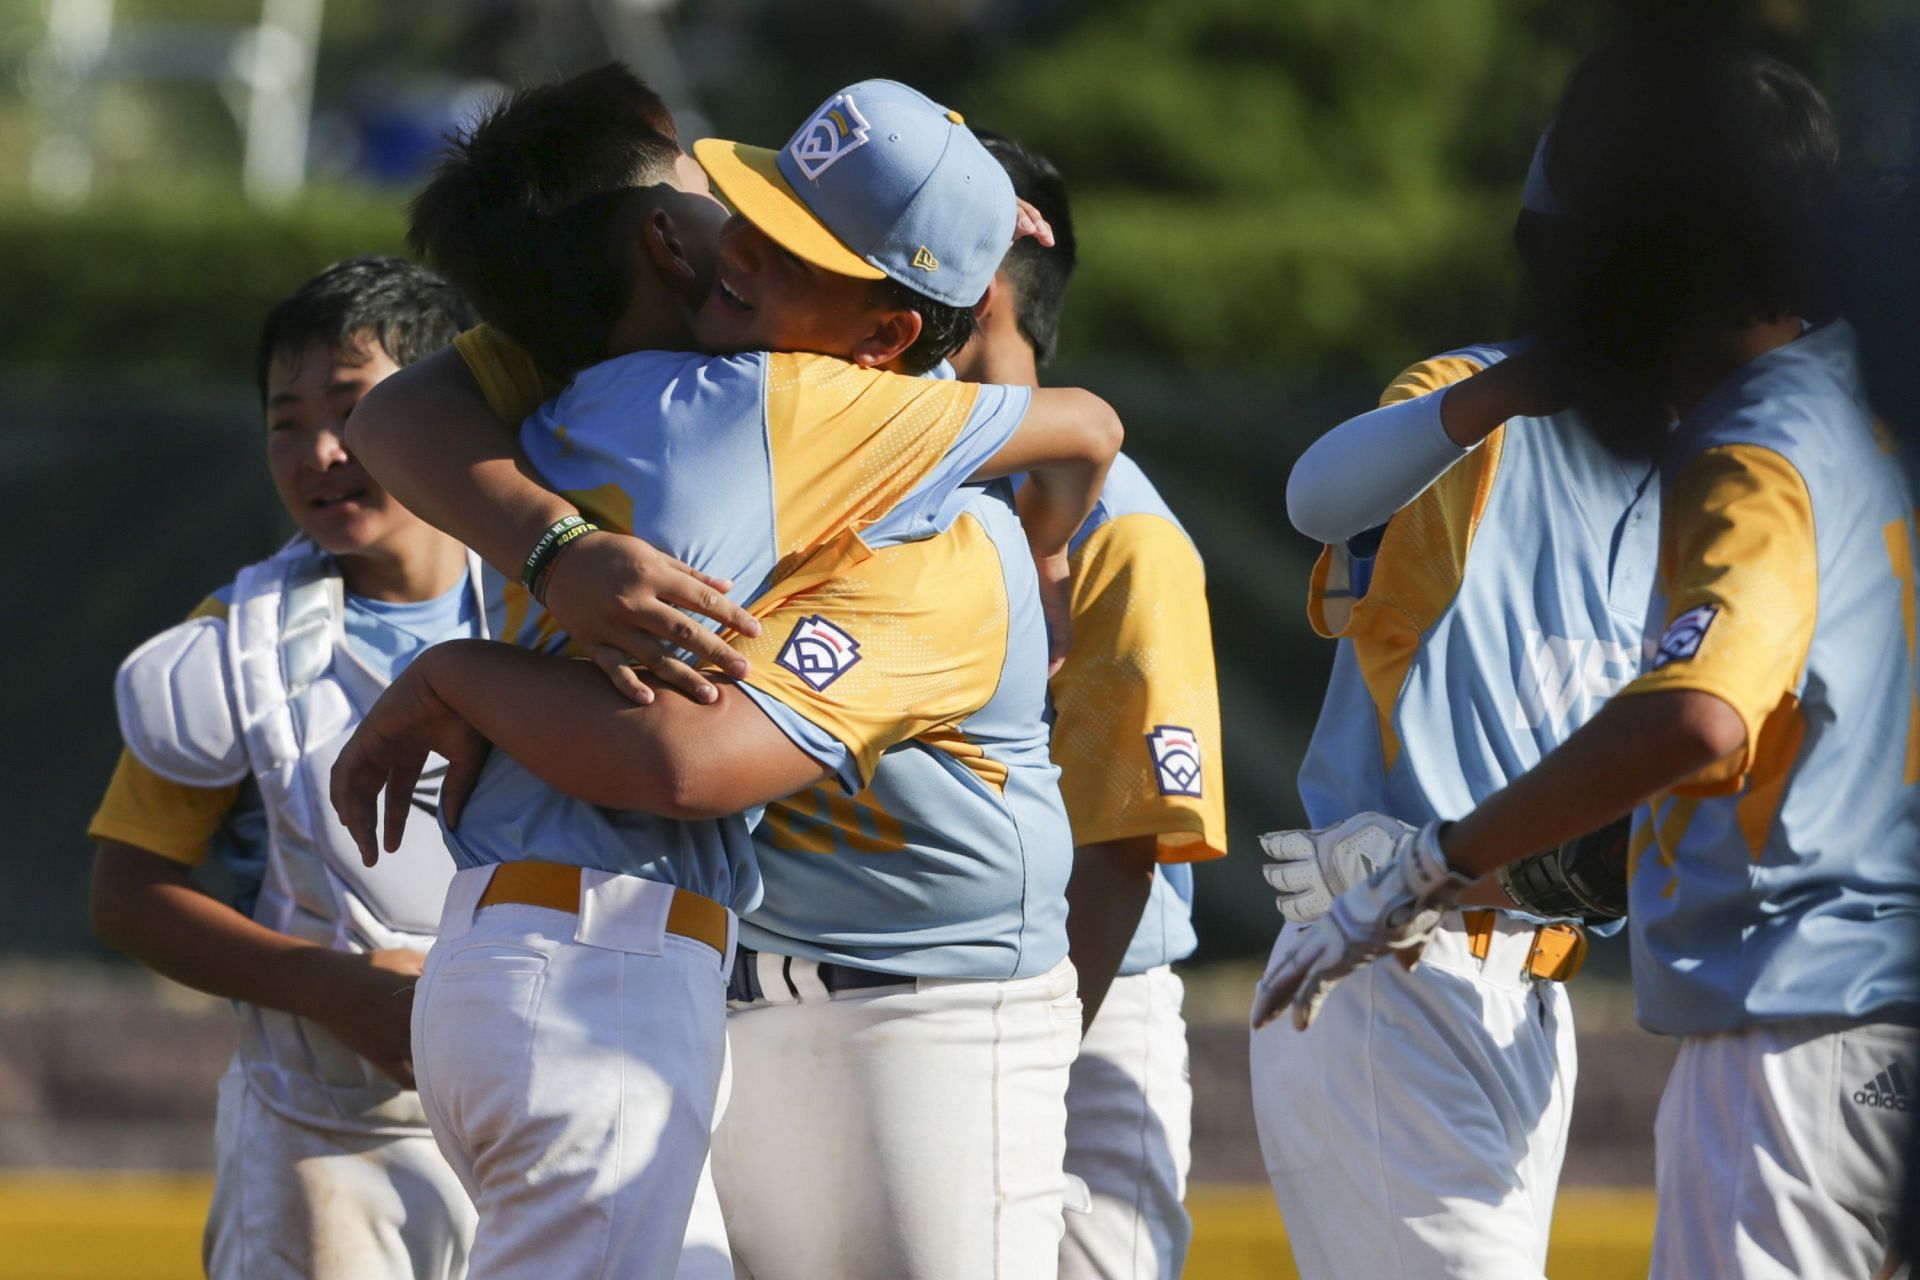 Past Little League World Series champions reflect on 'once-in-a